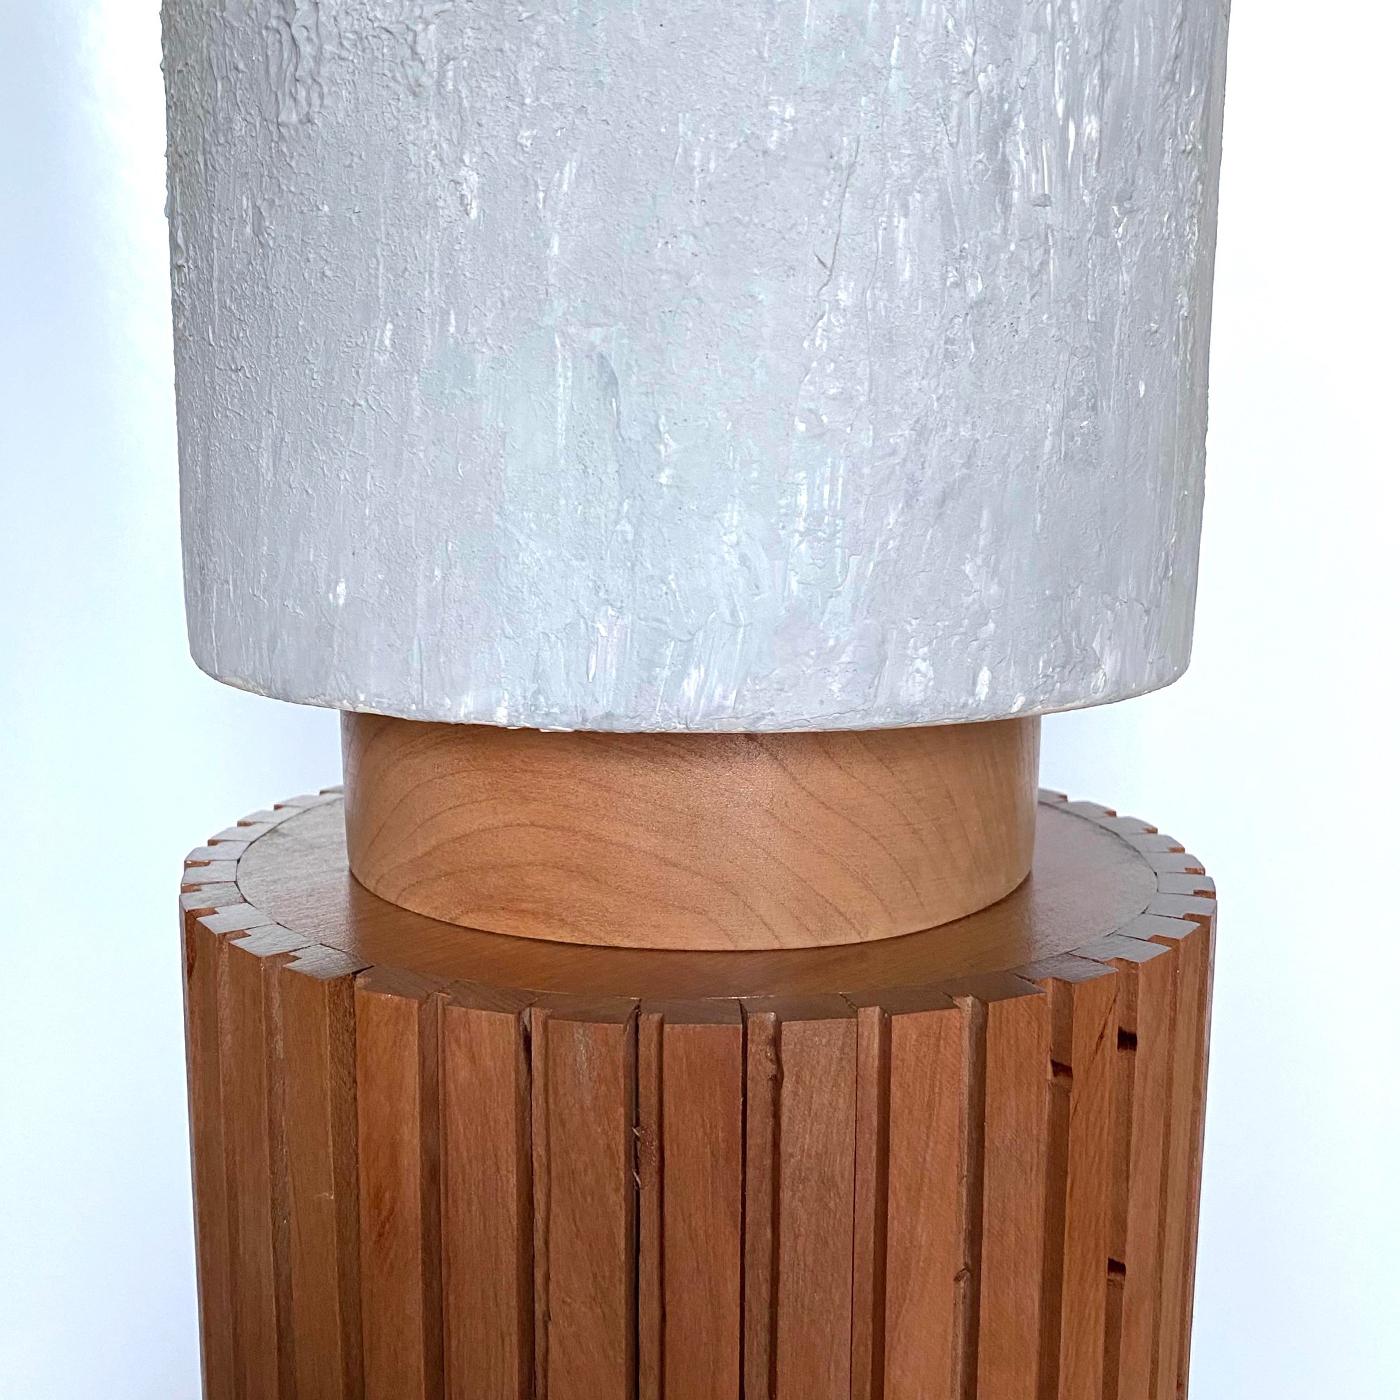 Inspired by the imposing, fierce silhouette of totem poles, this one-off table lamp is comprised of an interplay of cylindrical volumes of high visual impact even when the lamp is off. A round, deftly engraved base in solid durmast sustains the body